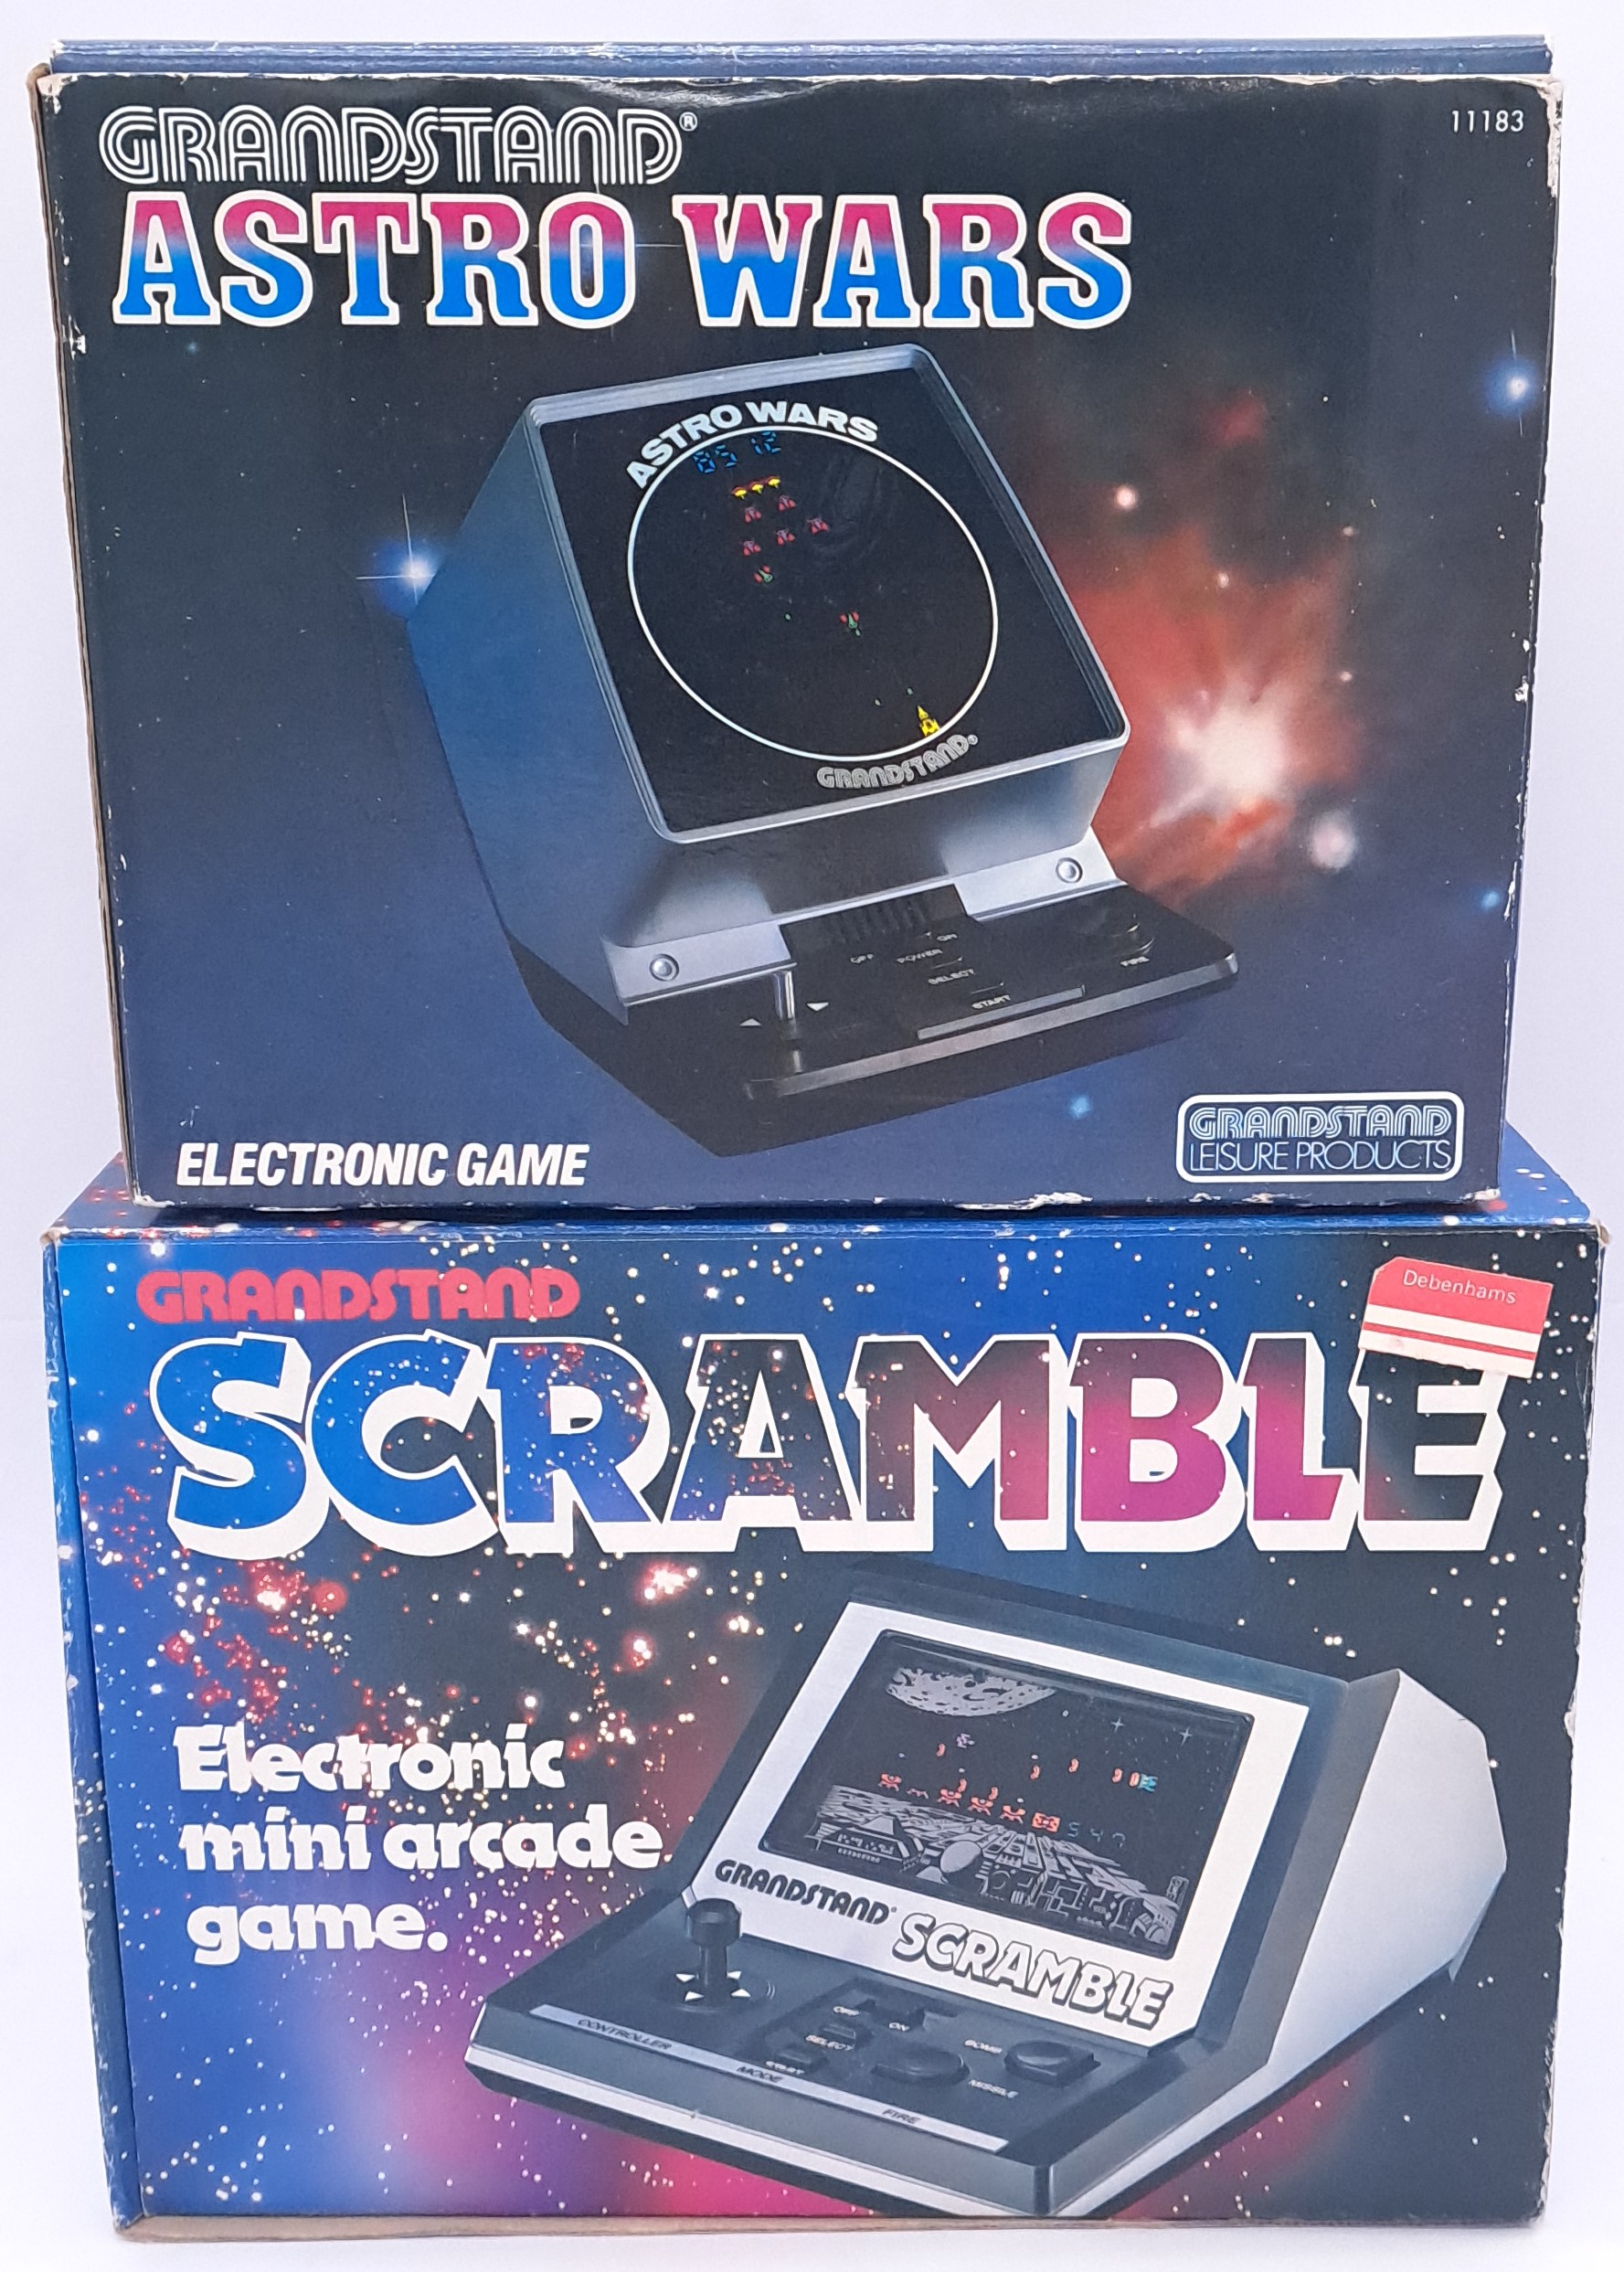 Vintage/Retro Gaming. Grandstand a boxed pair of c1980's battery operated